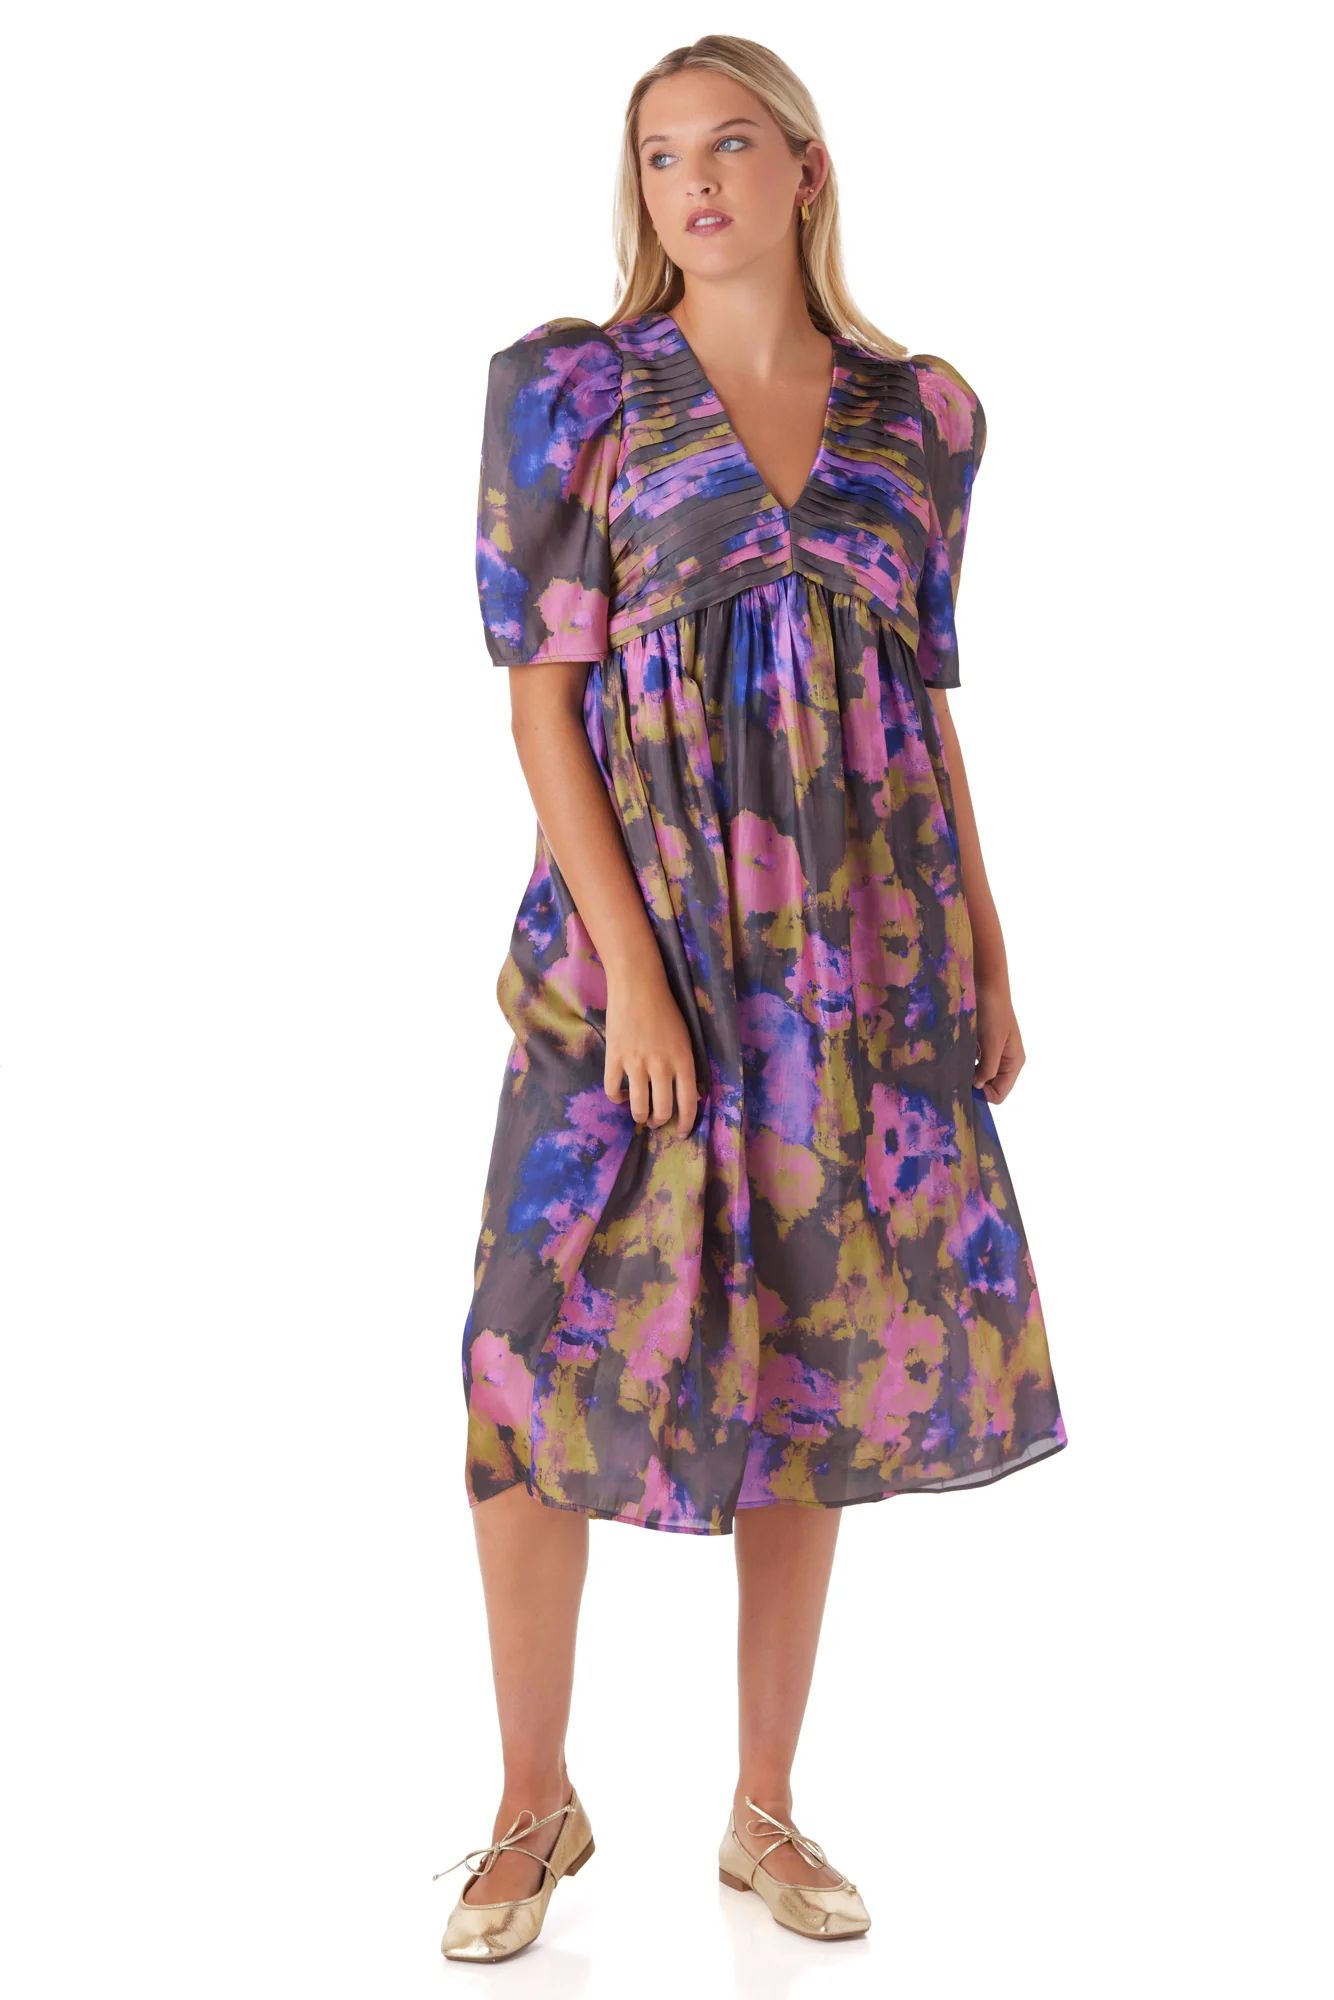 Marley Dress in Blurred Floral Moody | CROSBY by Mollie Burch | CROSBY by Mollie Burch